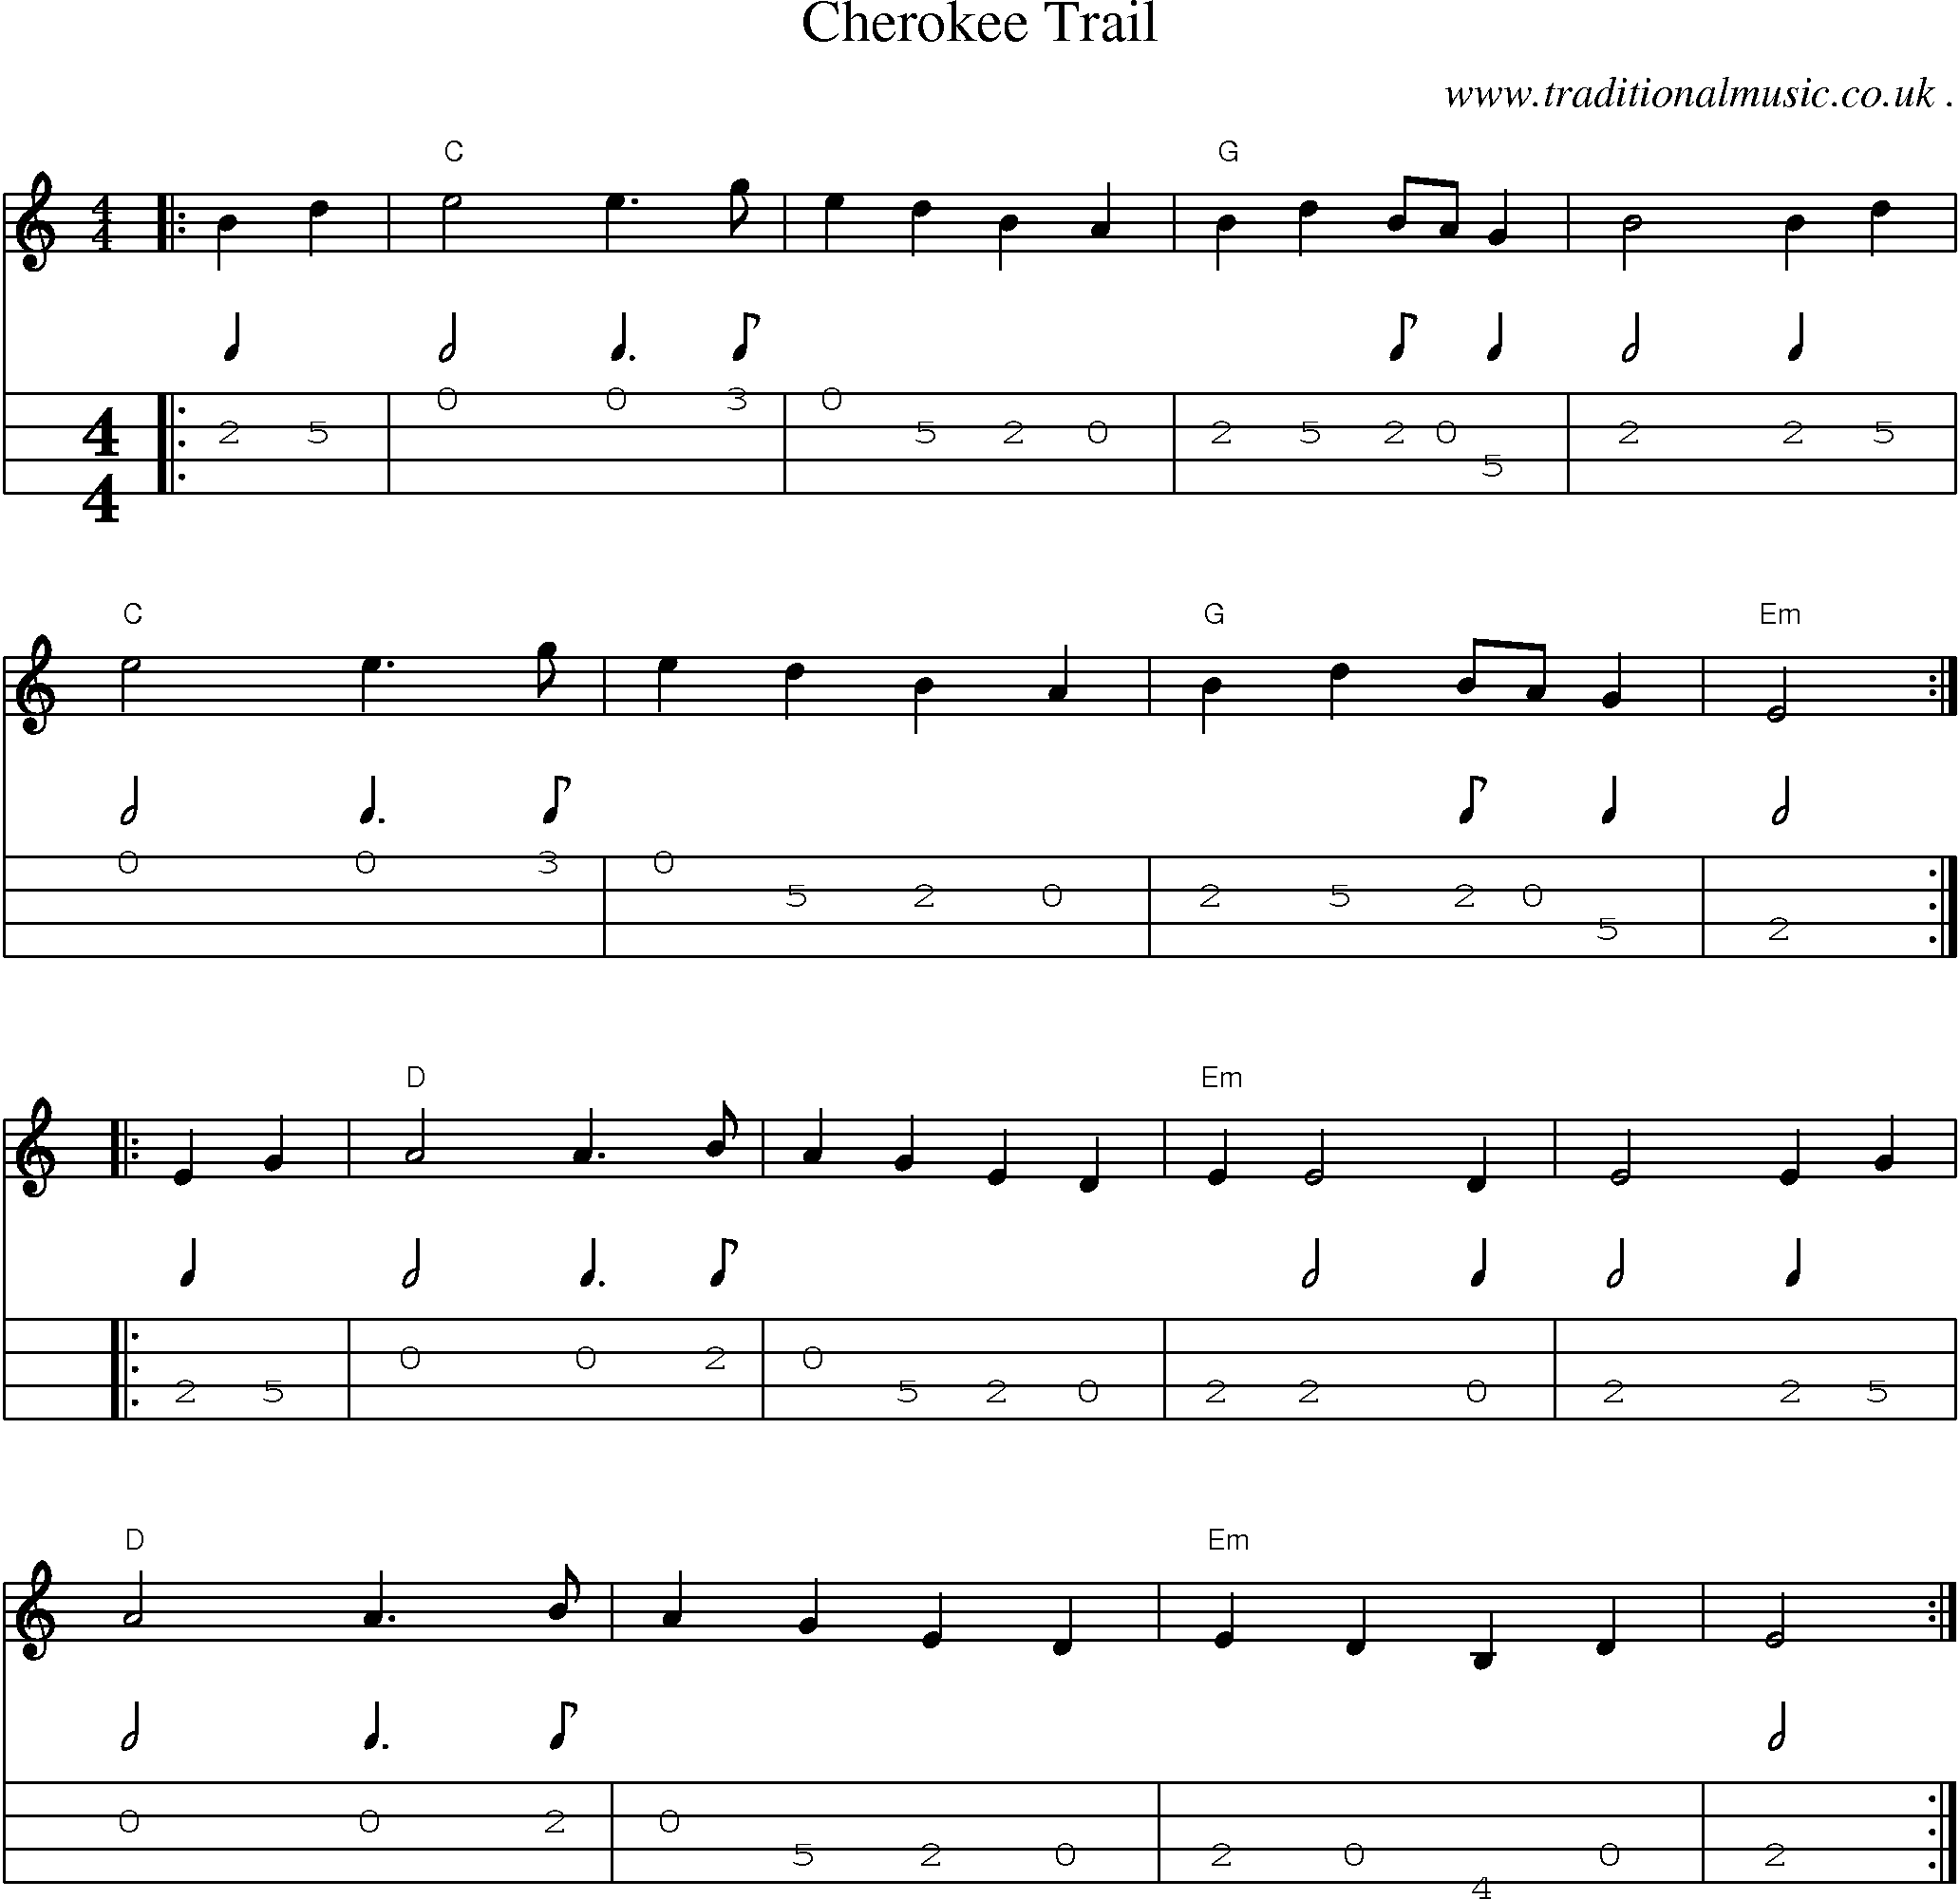 Music Score and Guitar Tabs for Cherokee Trail